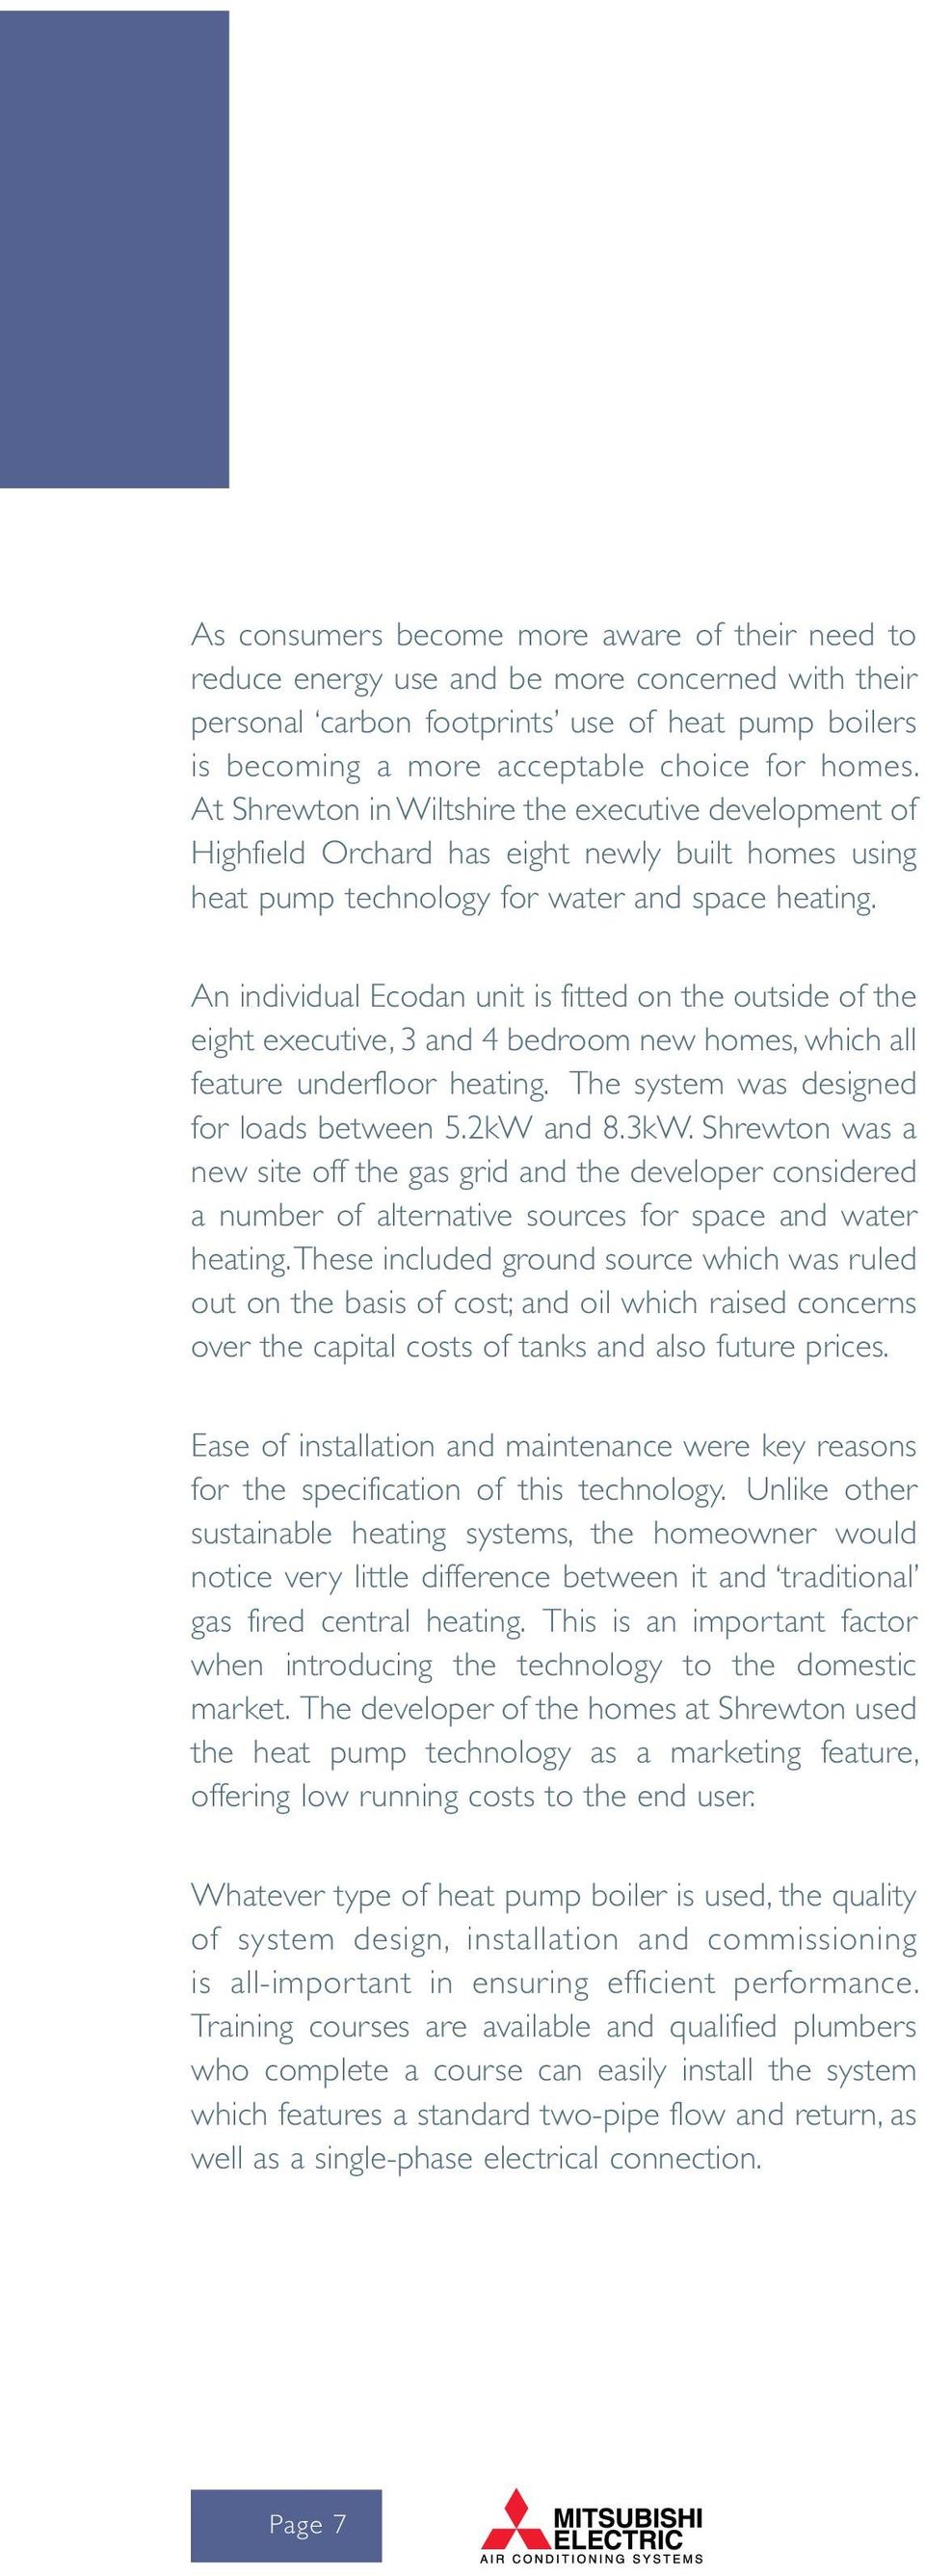 An individual Ecodan unit is fitted on the outside of the eight executive, 3 and 4 bedroom new homes, which all feature underfloor heating. The system was designed for loads between 5.2kW and 8.3kW.